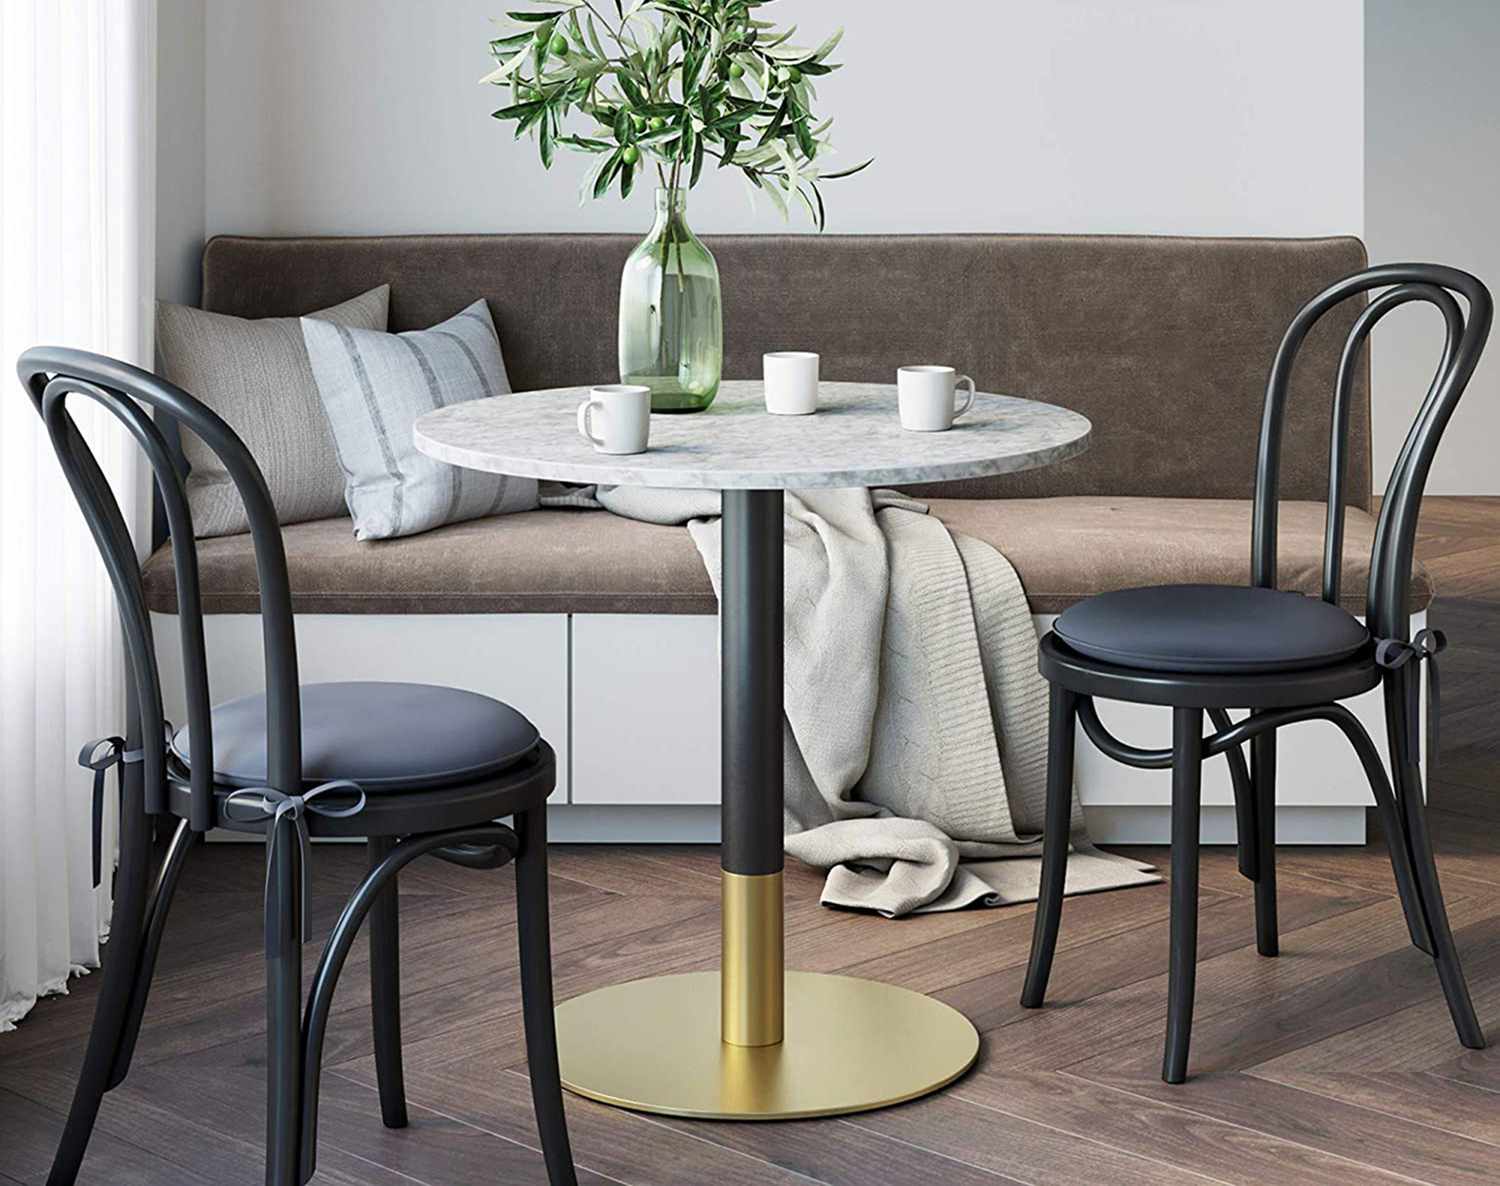 8 Best Dining Tables For Small Spaces, Small Round Black Kitchen Table And Chairs